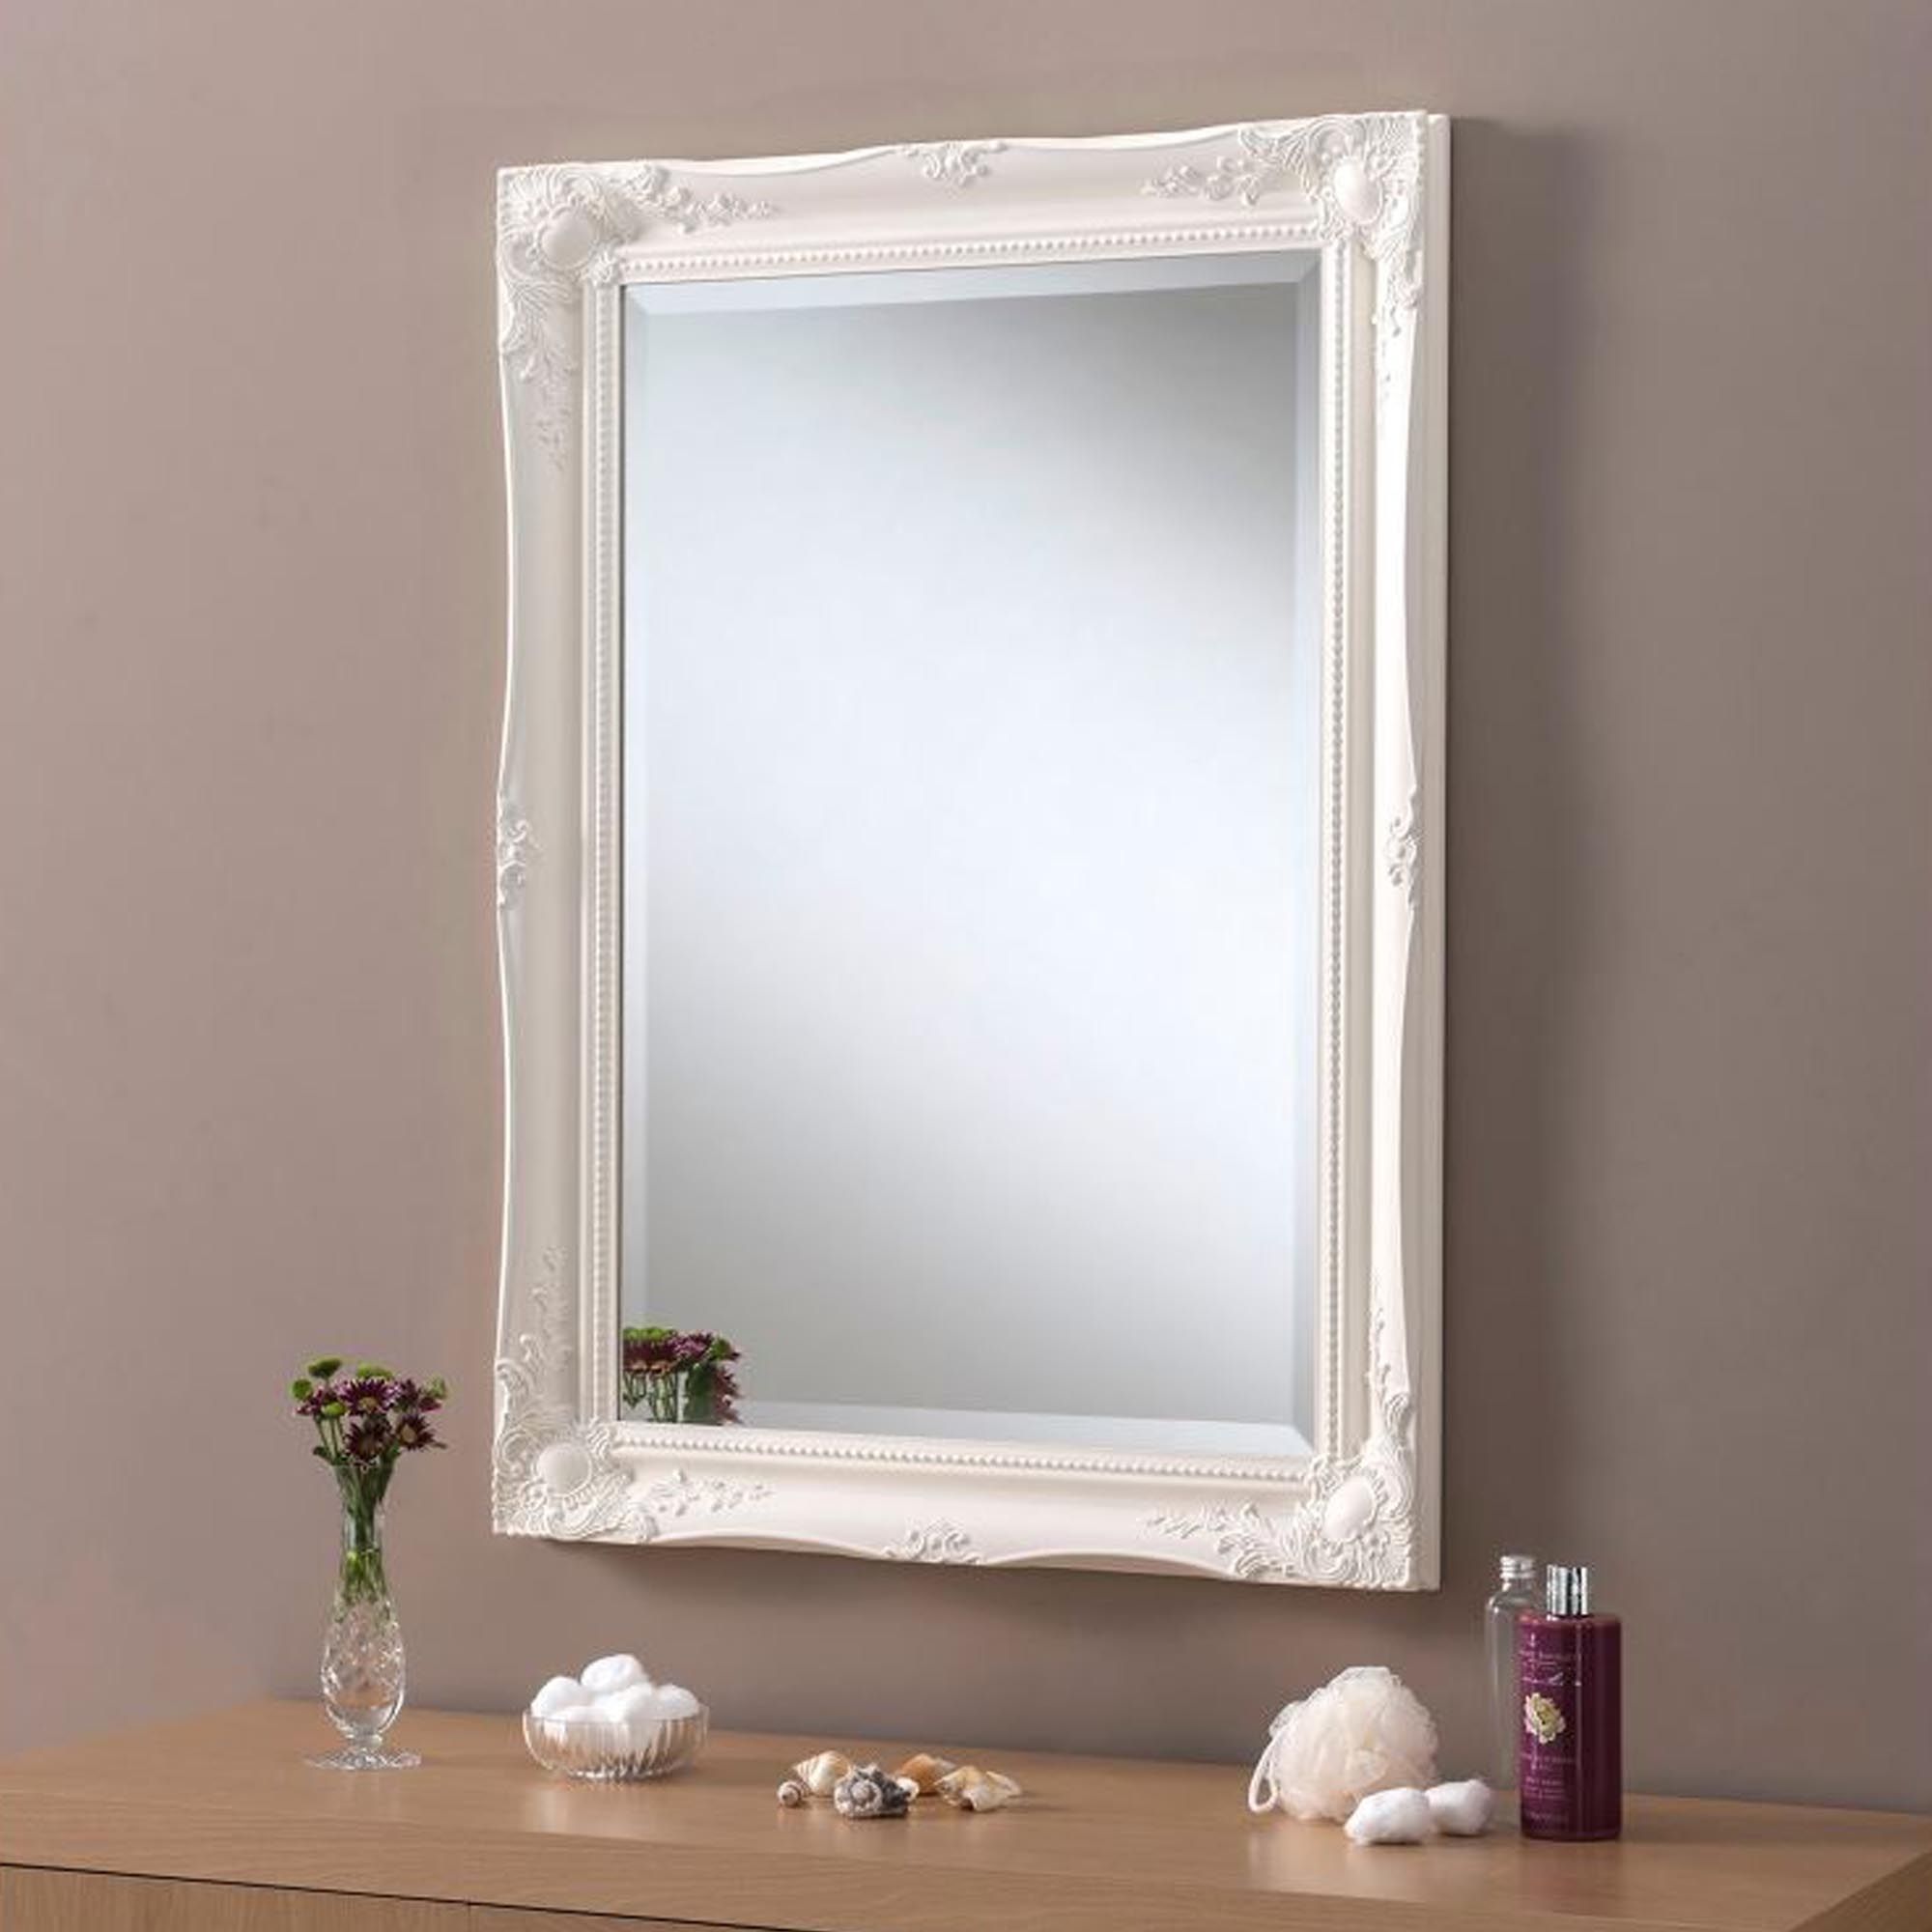 Decorative Ornate Antique French Style White Wall Mirror | Hd365 Throughout Accent Wall Mirrors (View 7 of 15)